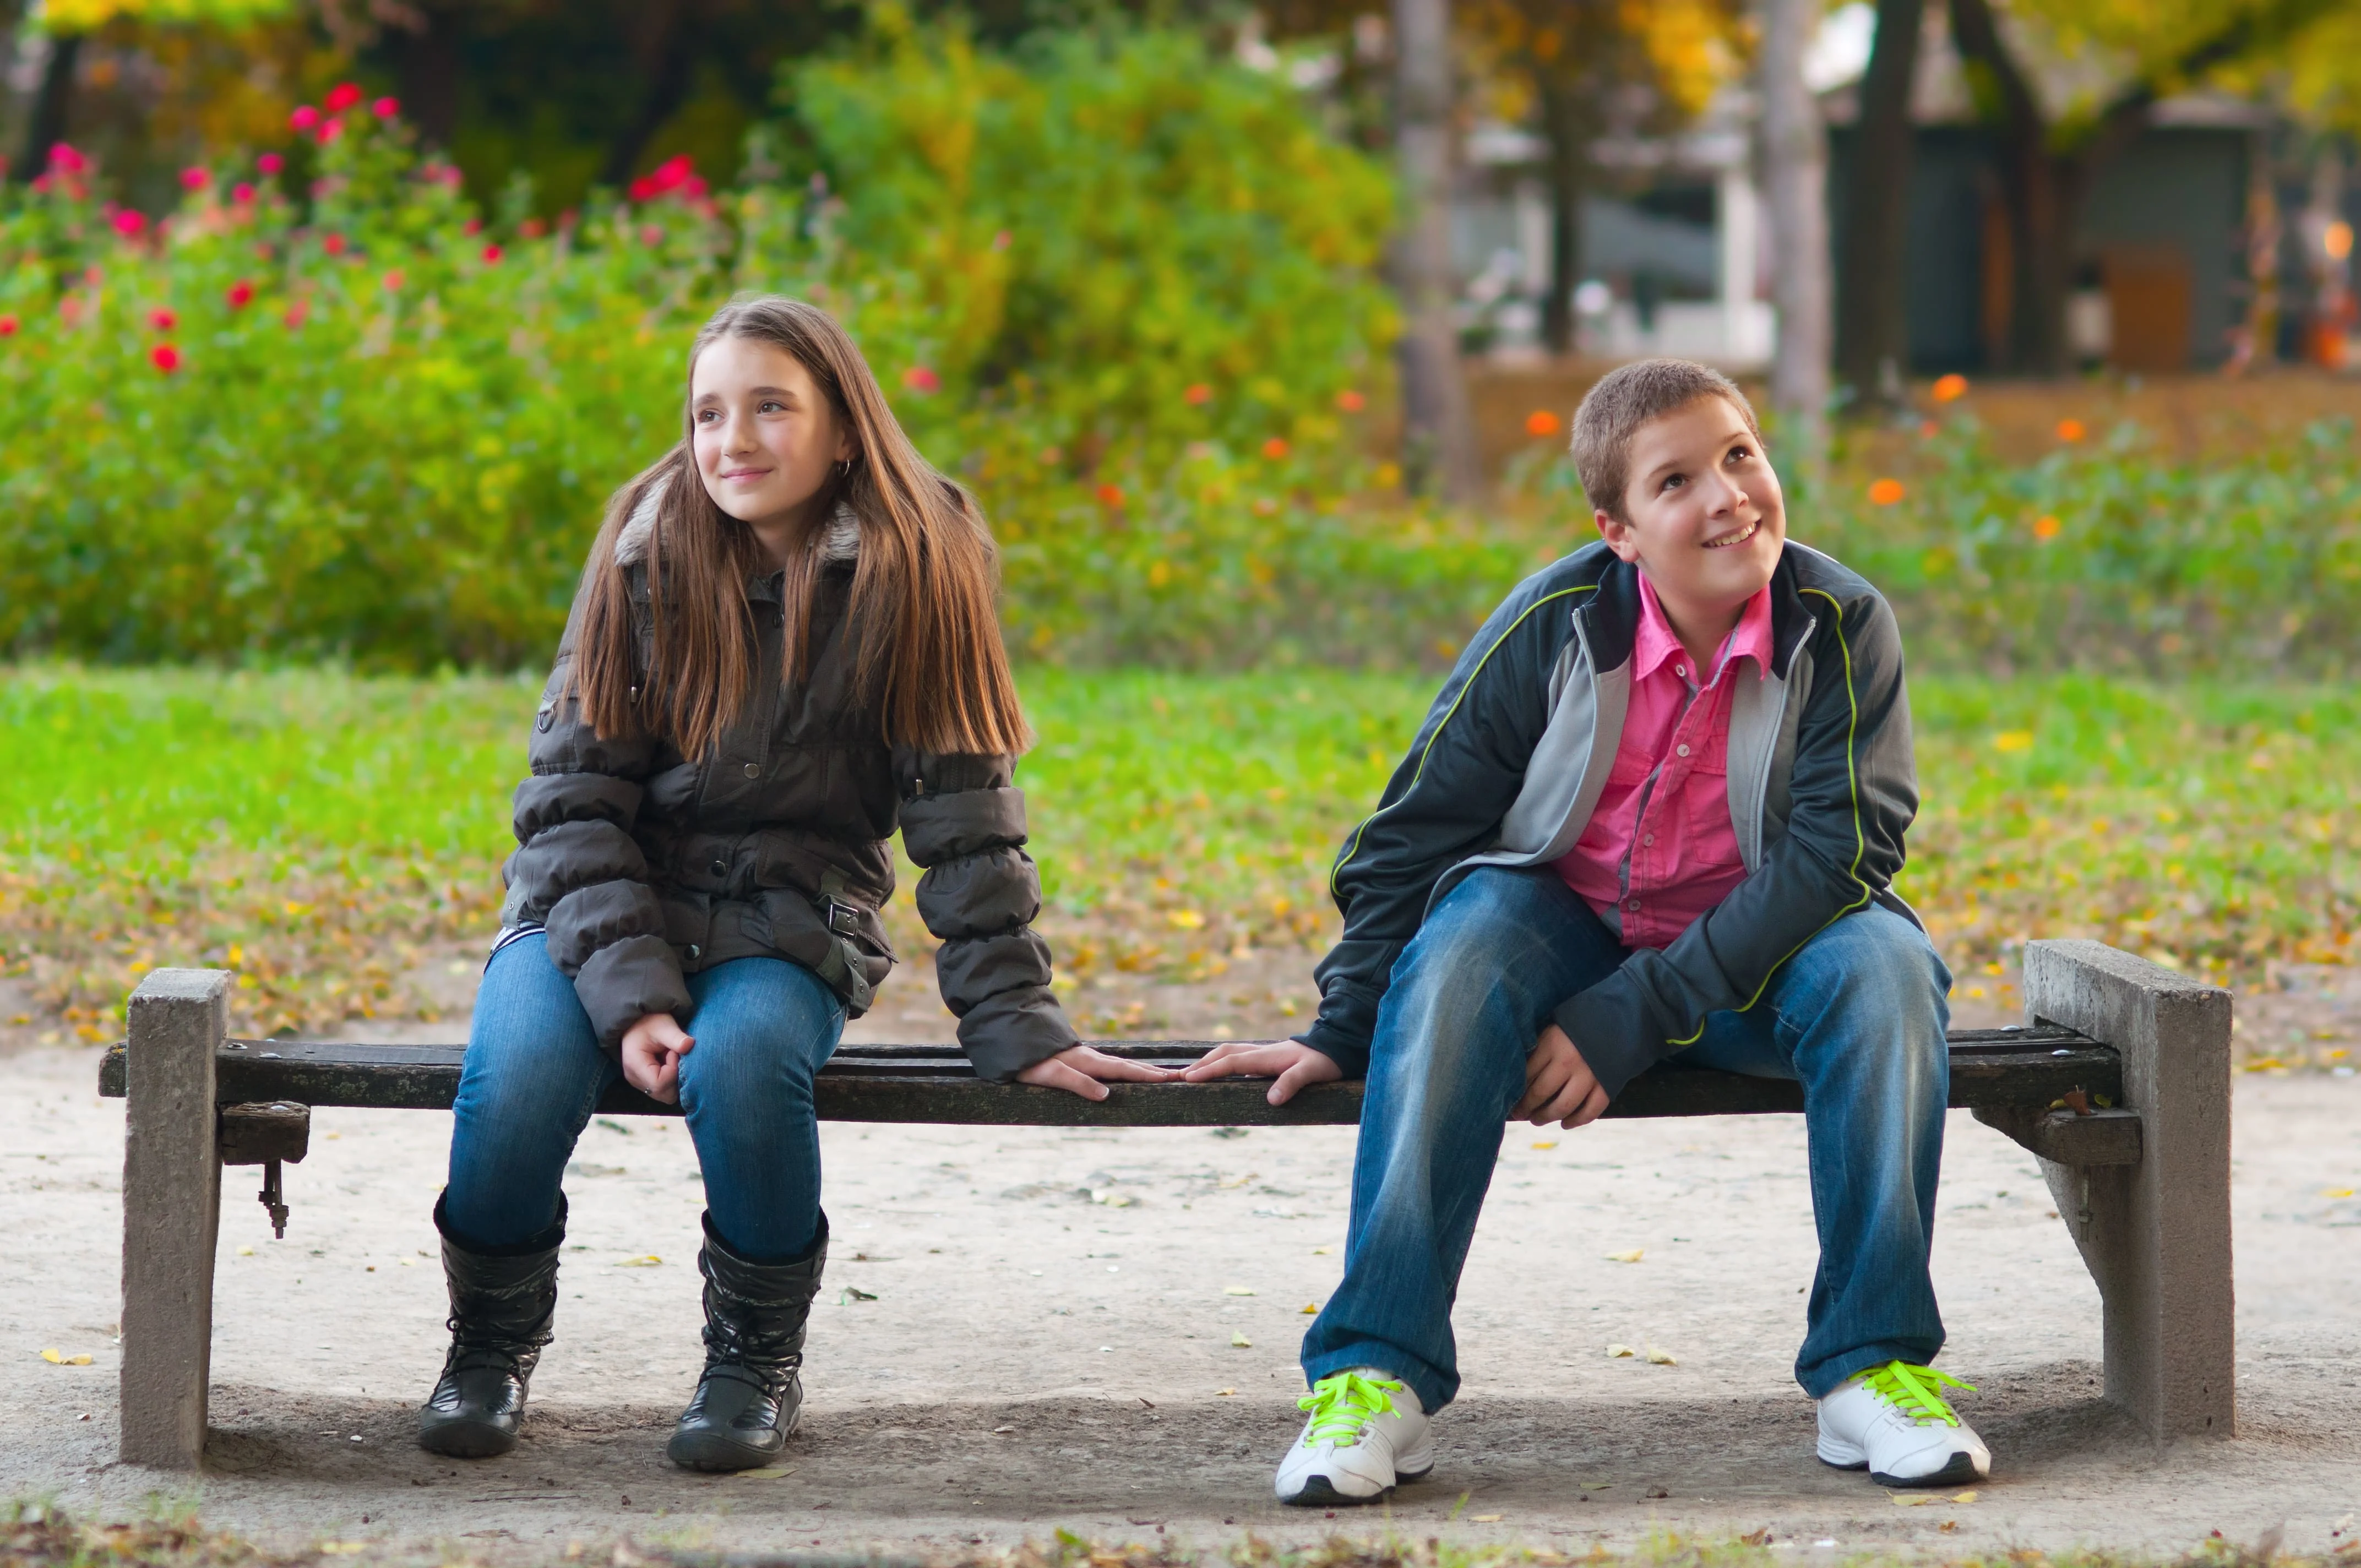 Girl and a boy sitting on a bench touching their hands while looking away